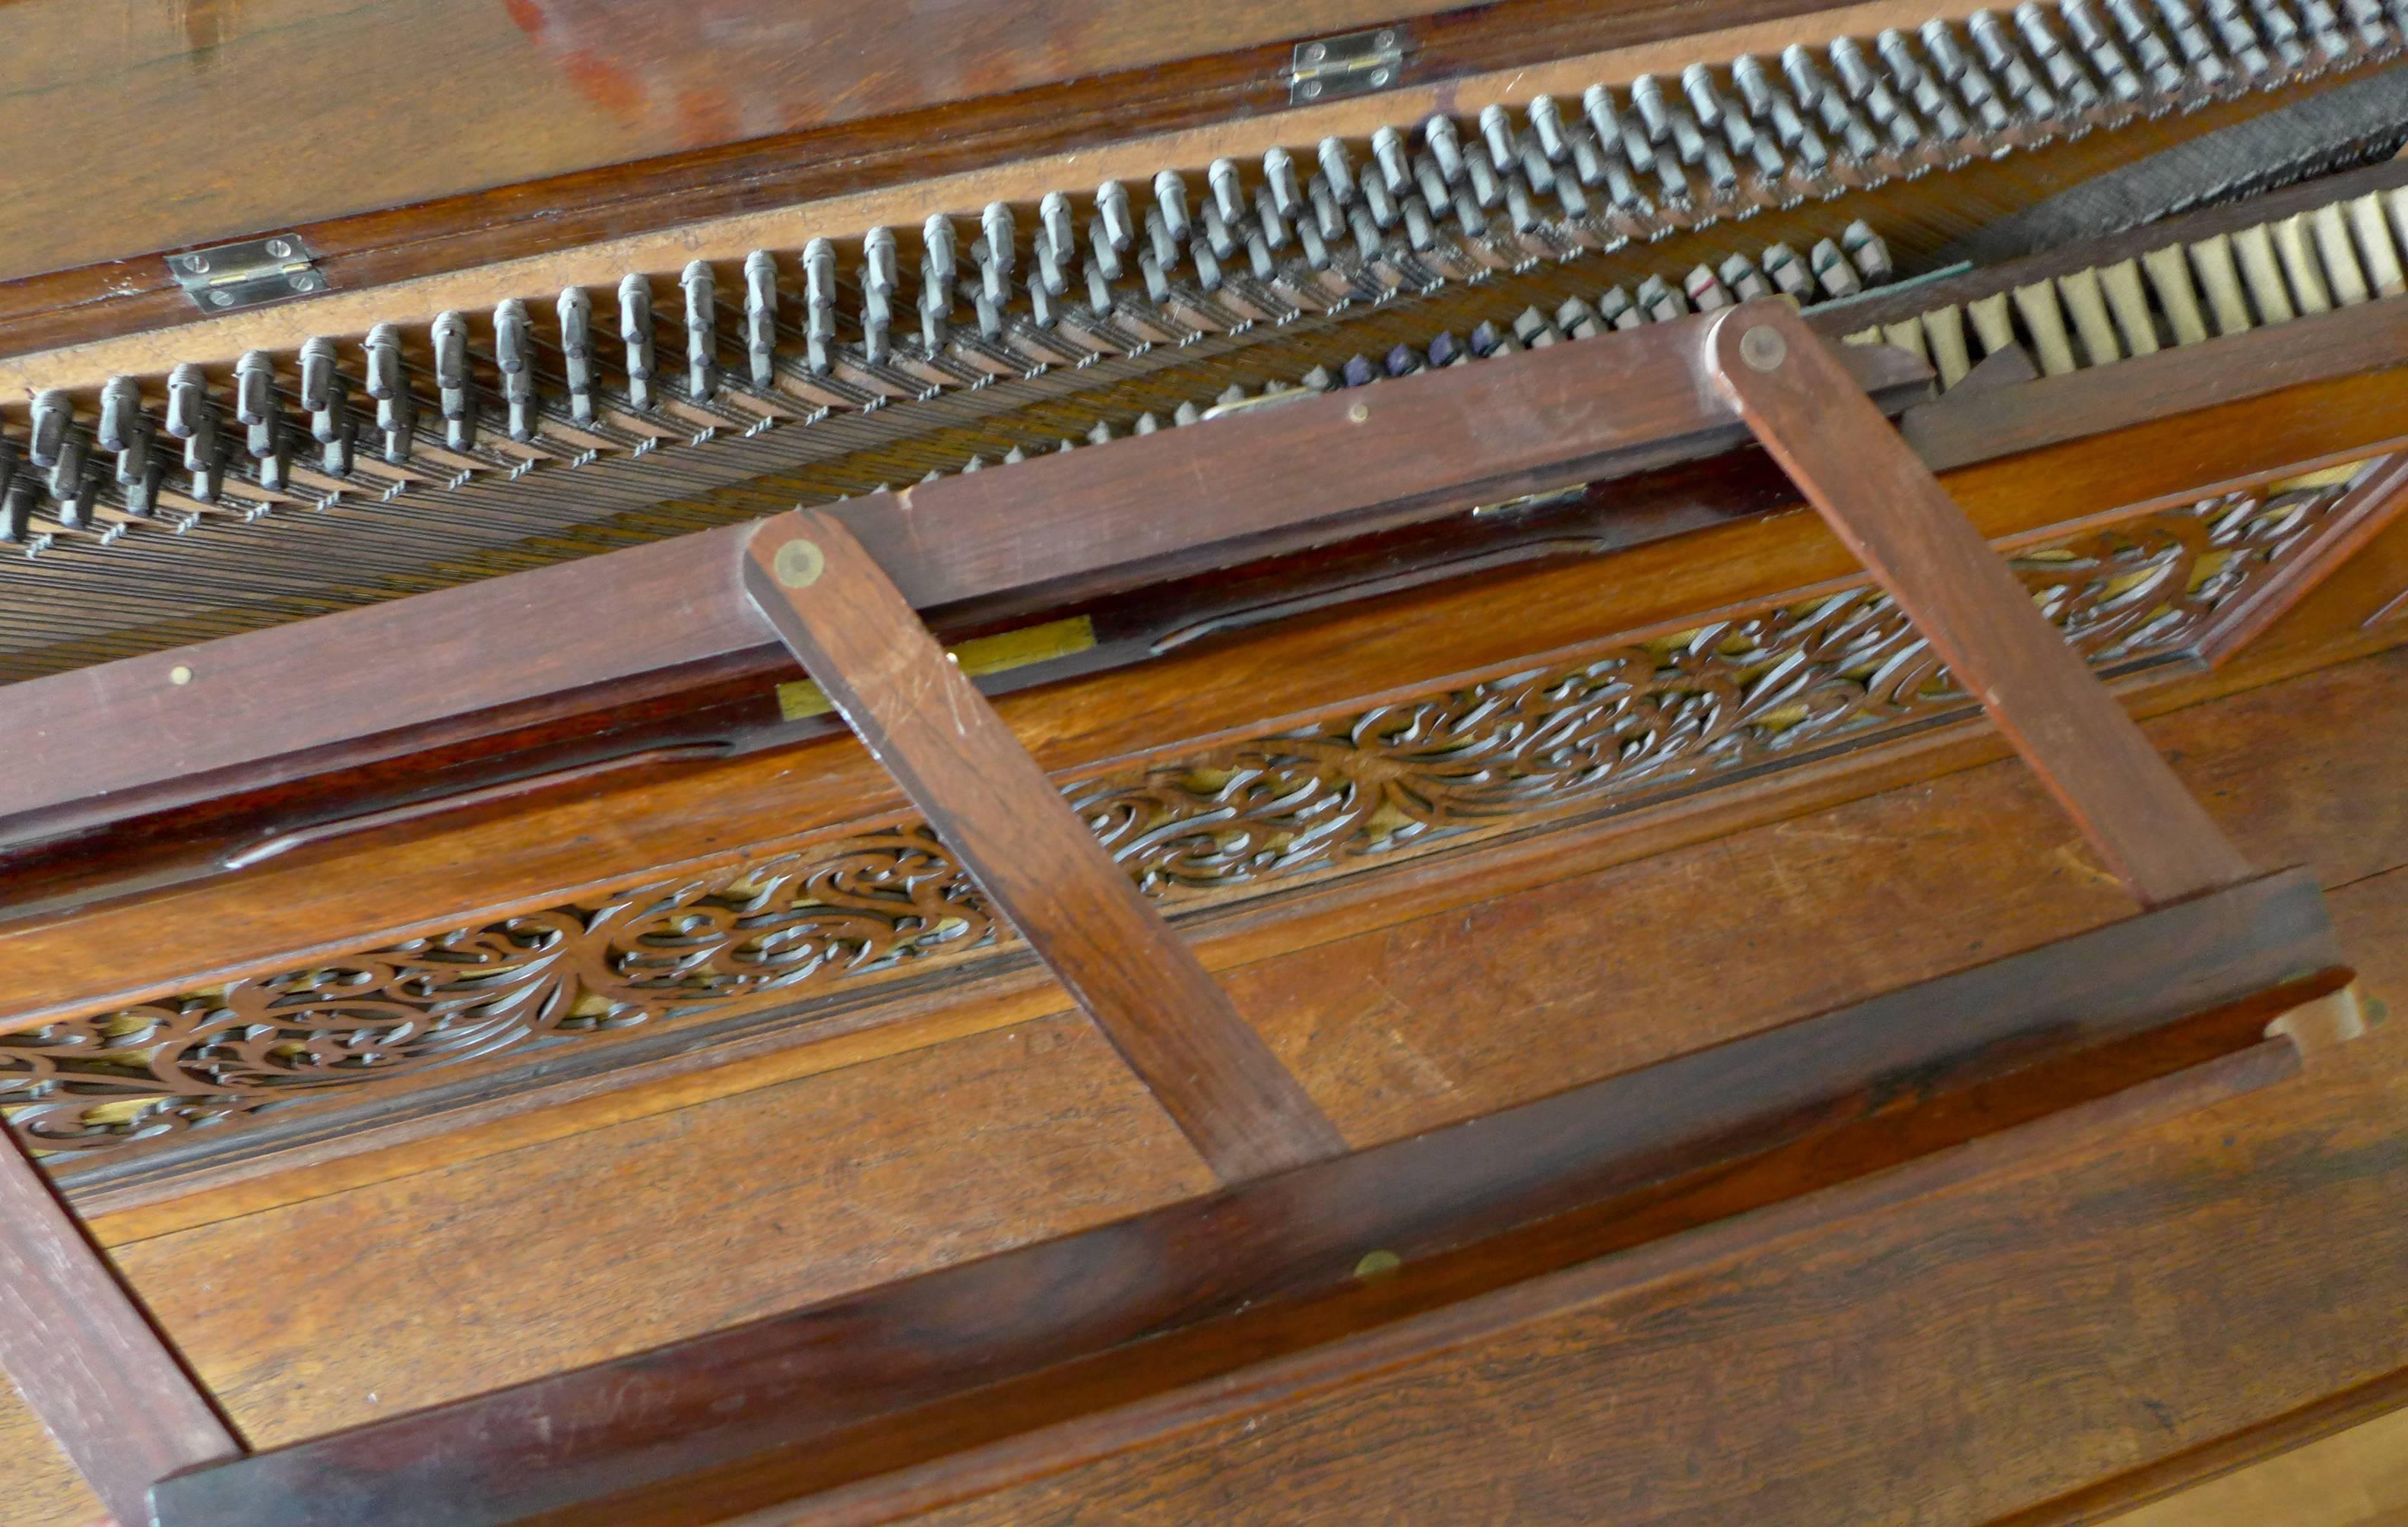 19th Century French Upright Piano Roller et Blanchet, circa 1830